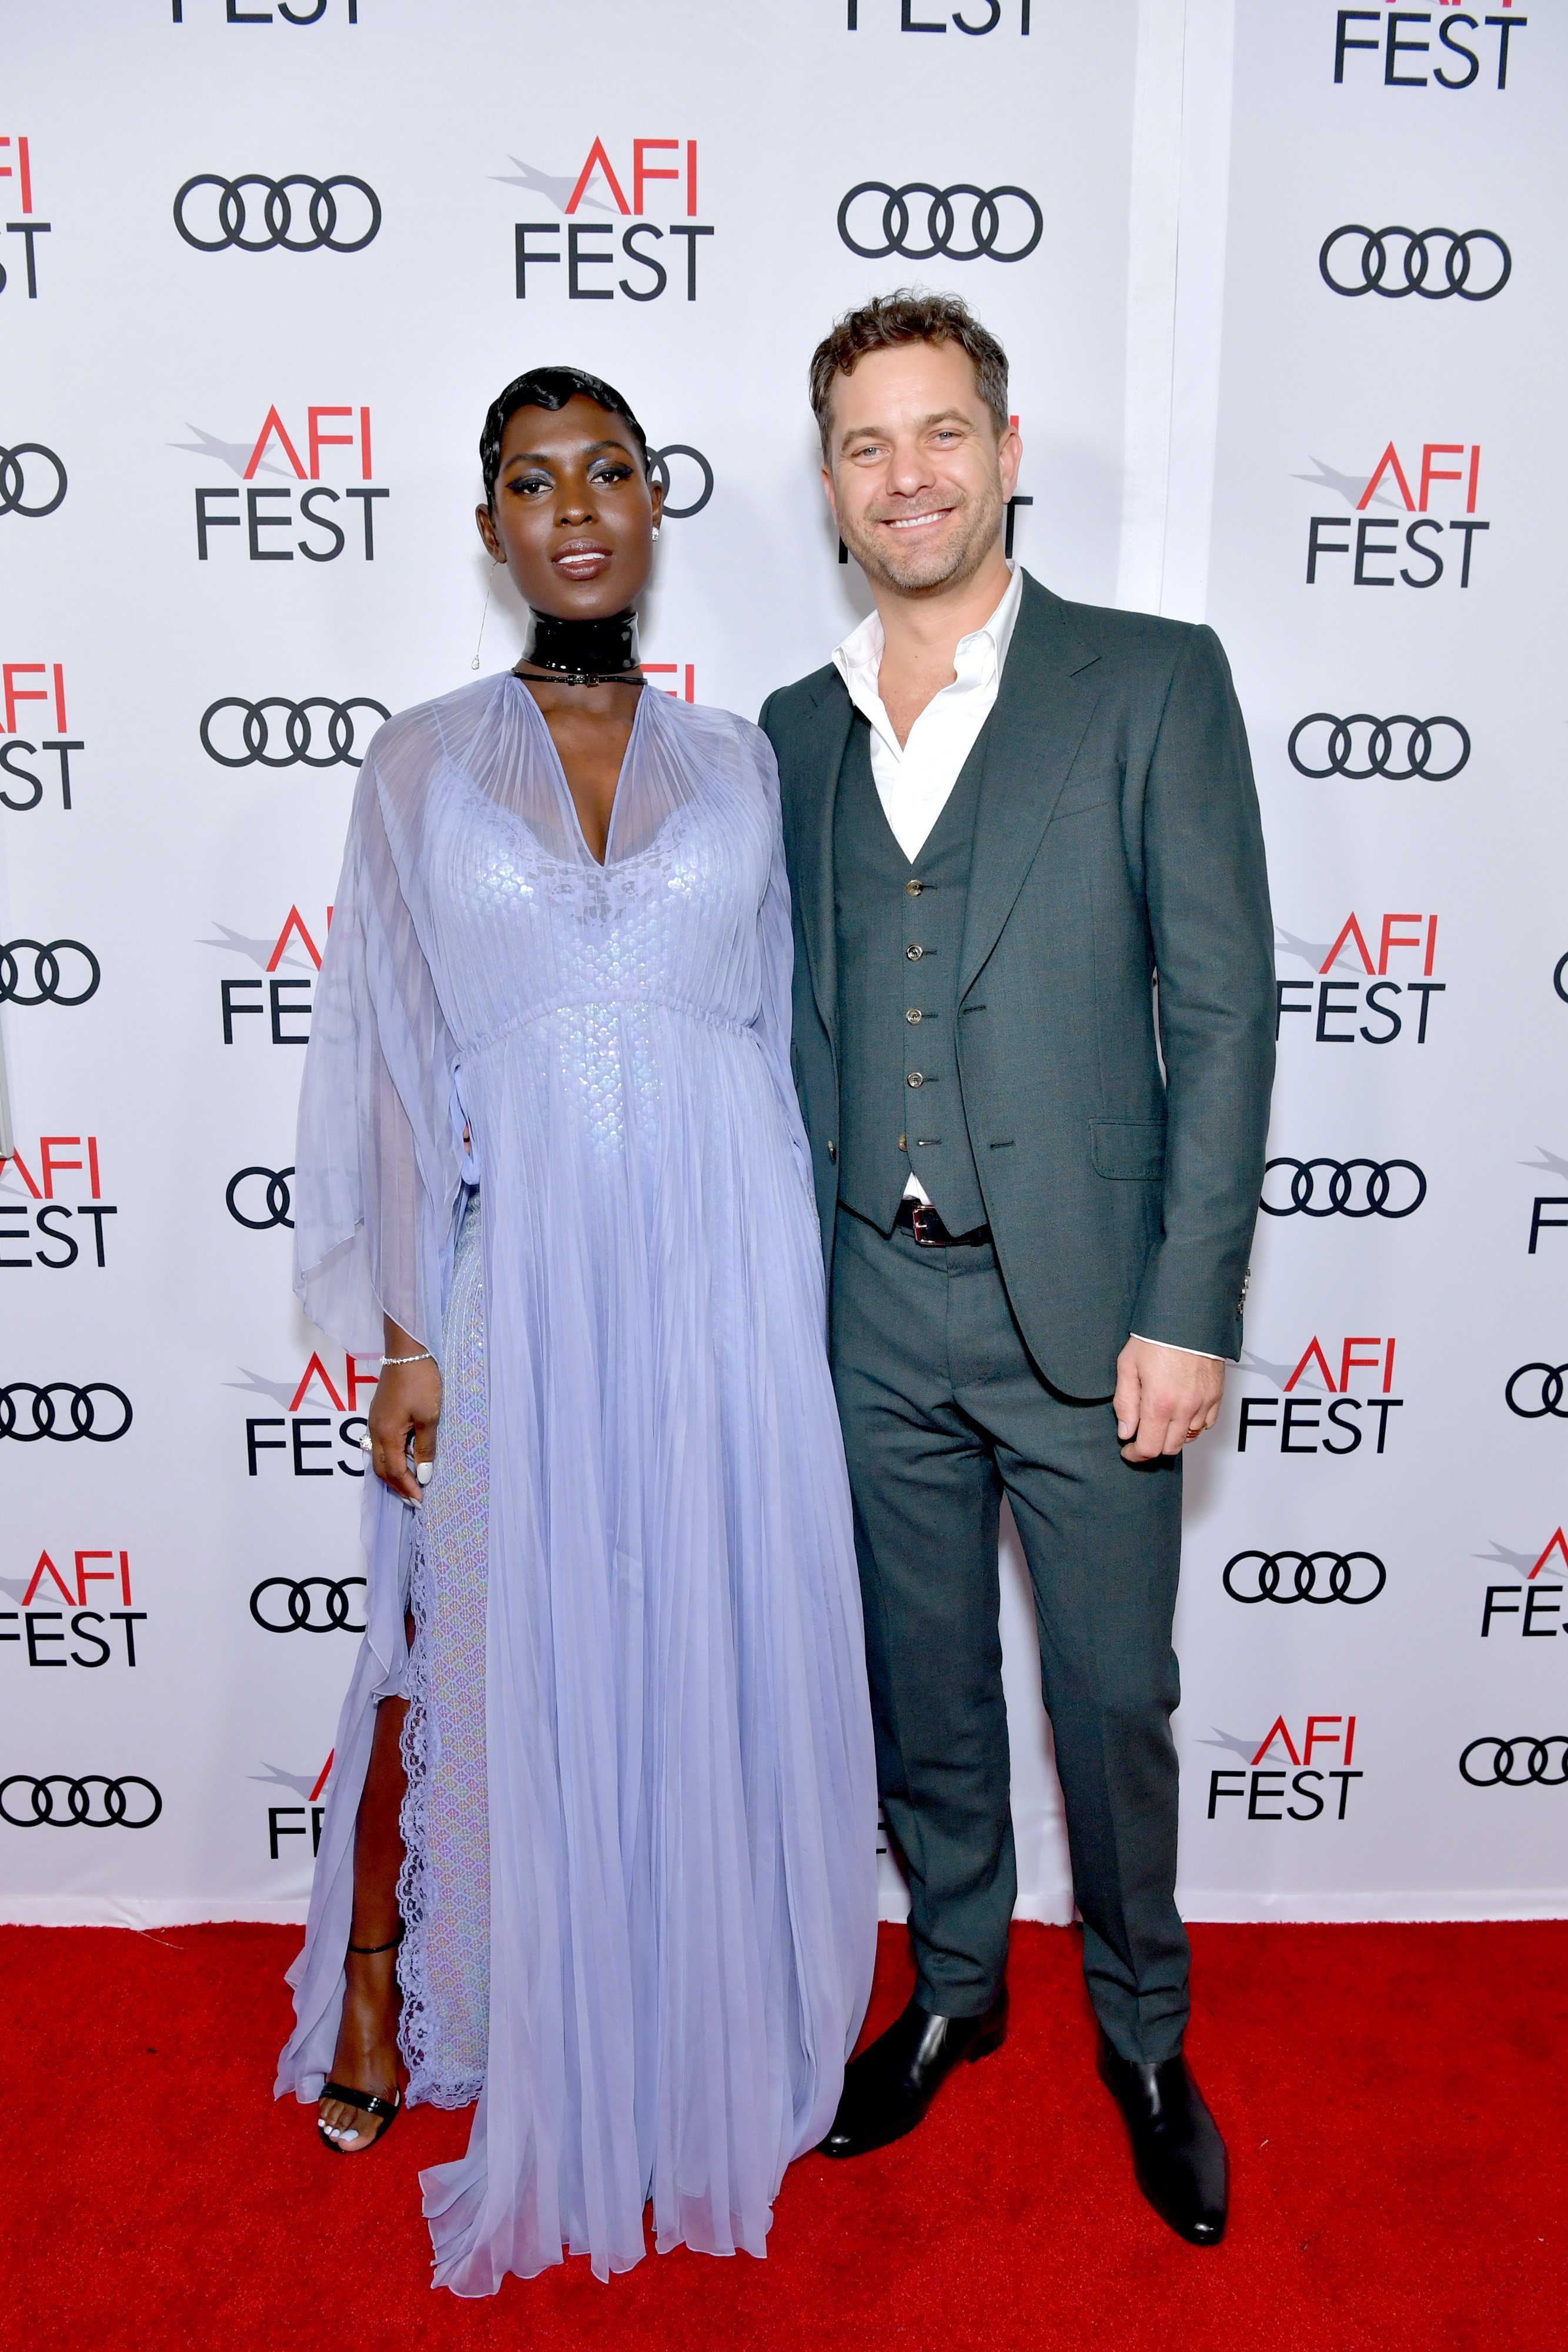 Joshua Jackson and Jodie Turner-Smith at the "Queen & Slim" premiere in November 2019. | Photo: Getty Images